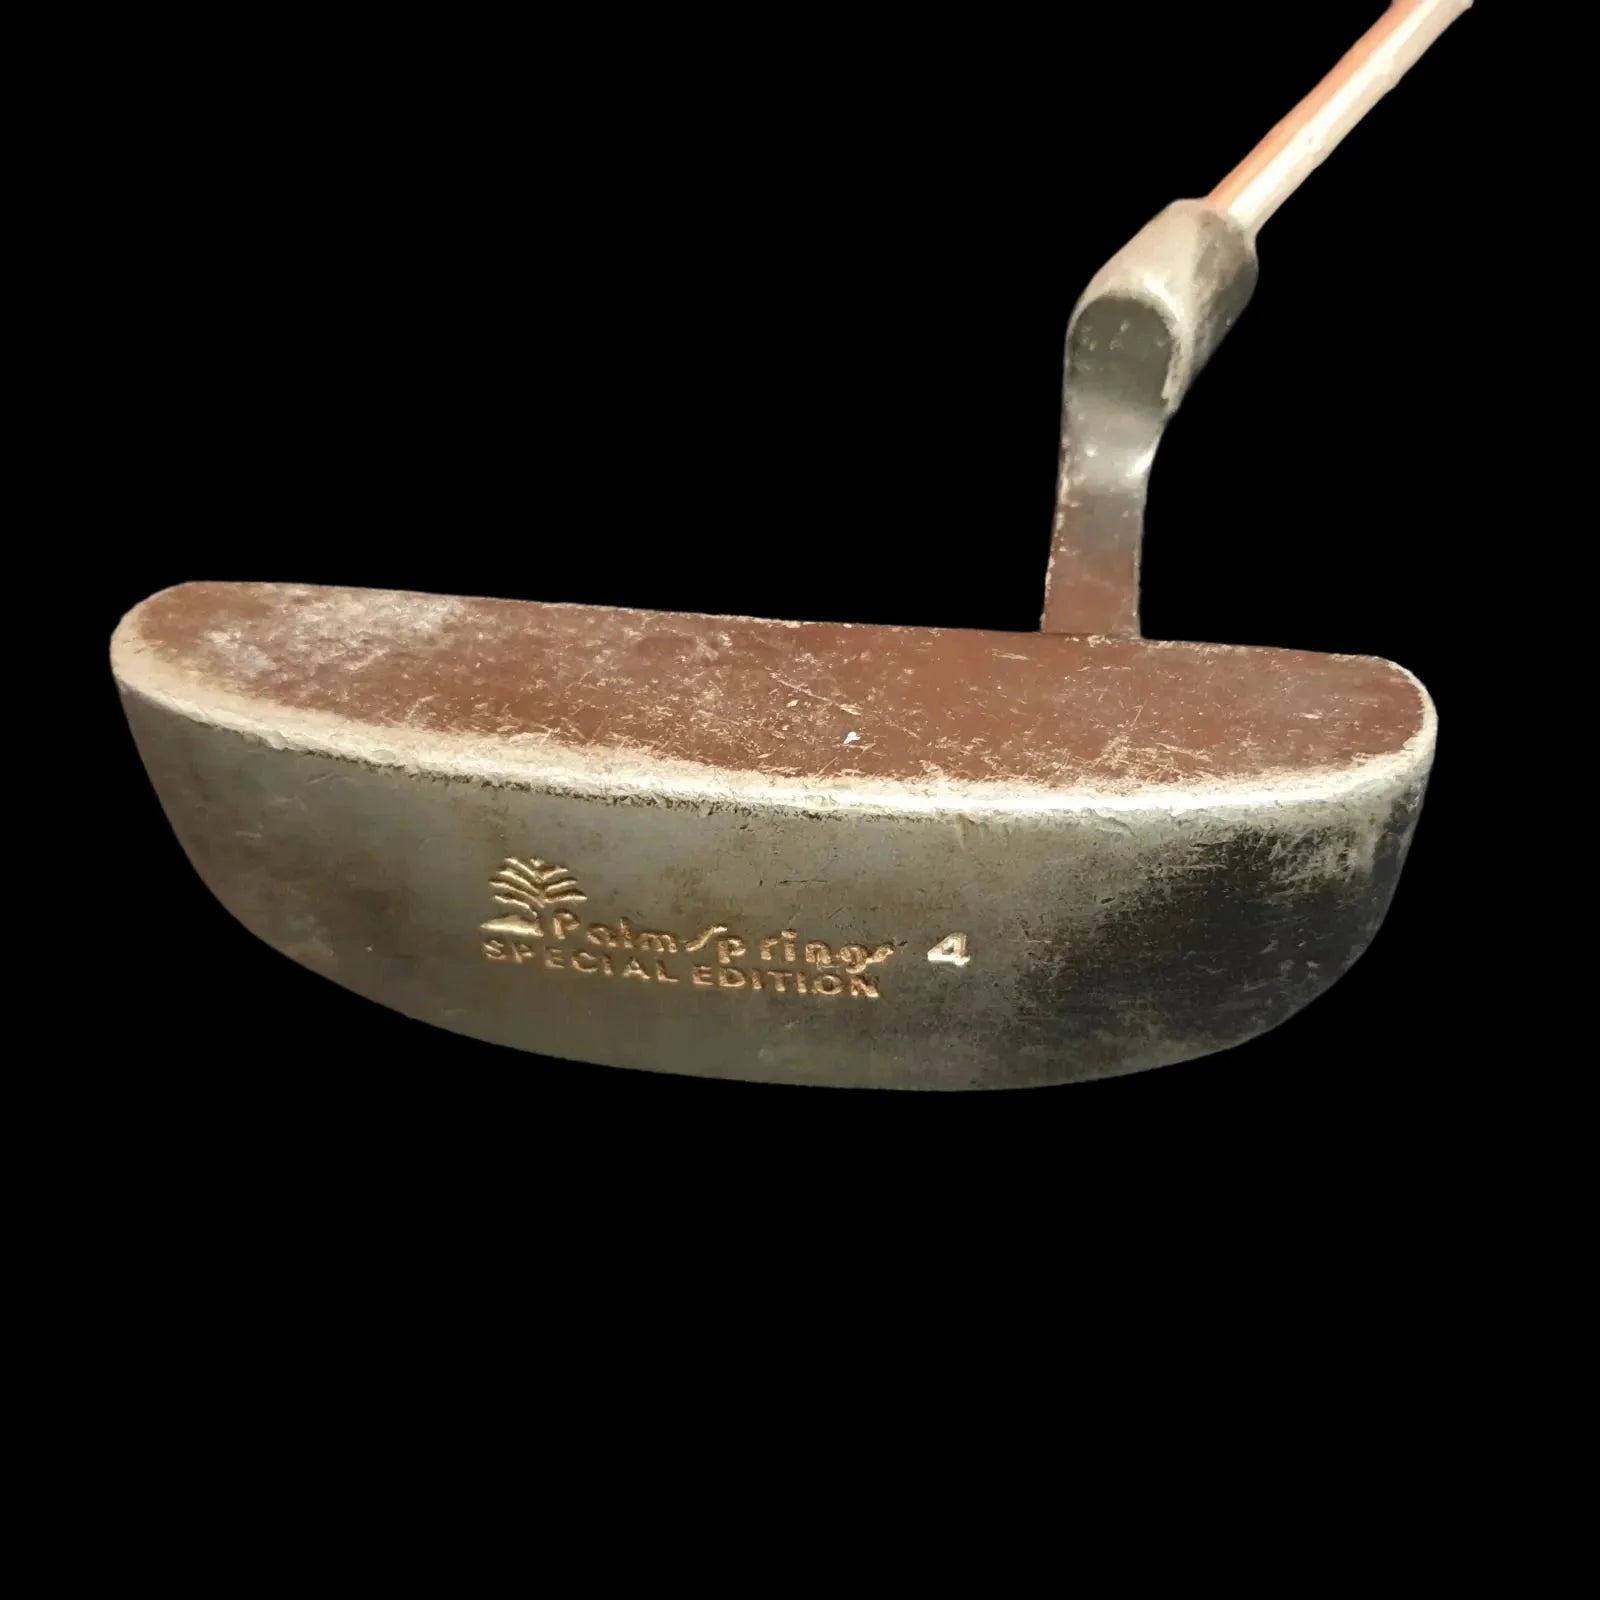 Palm Springs Special Edition Putter - Golf Clubs - 1 - 719